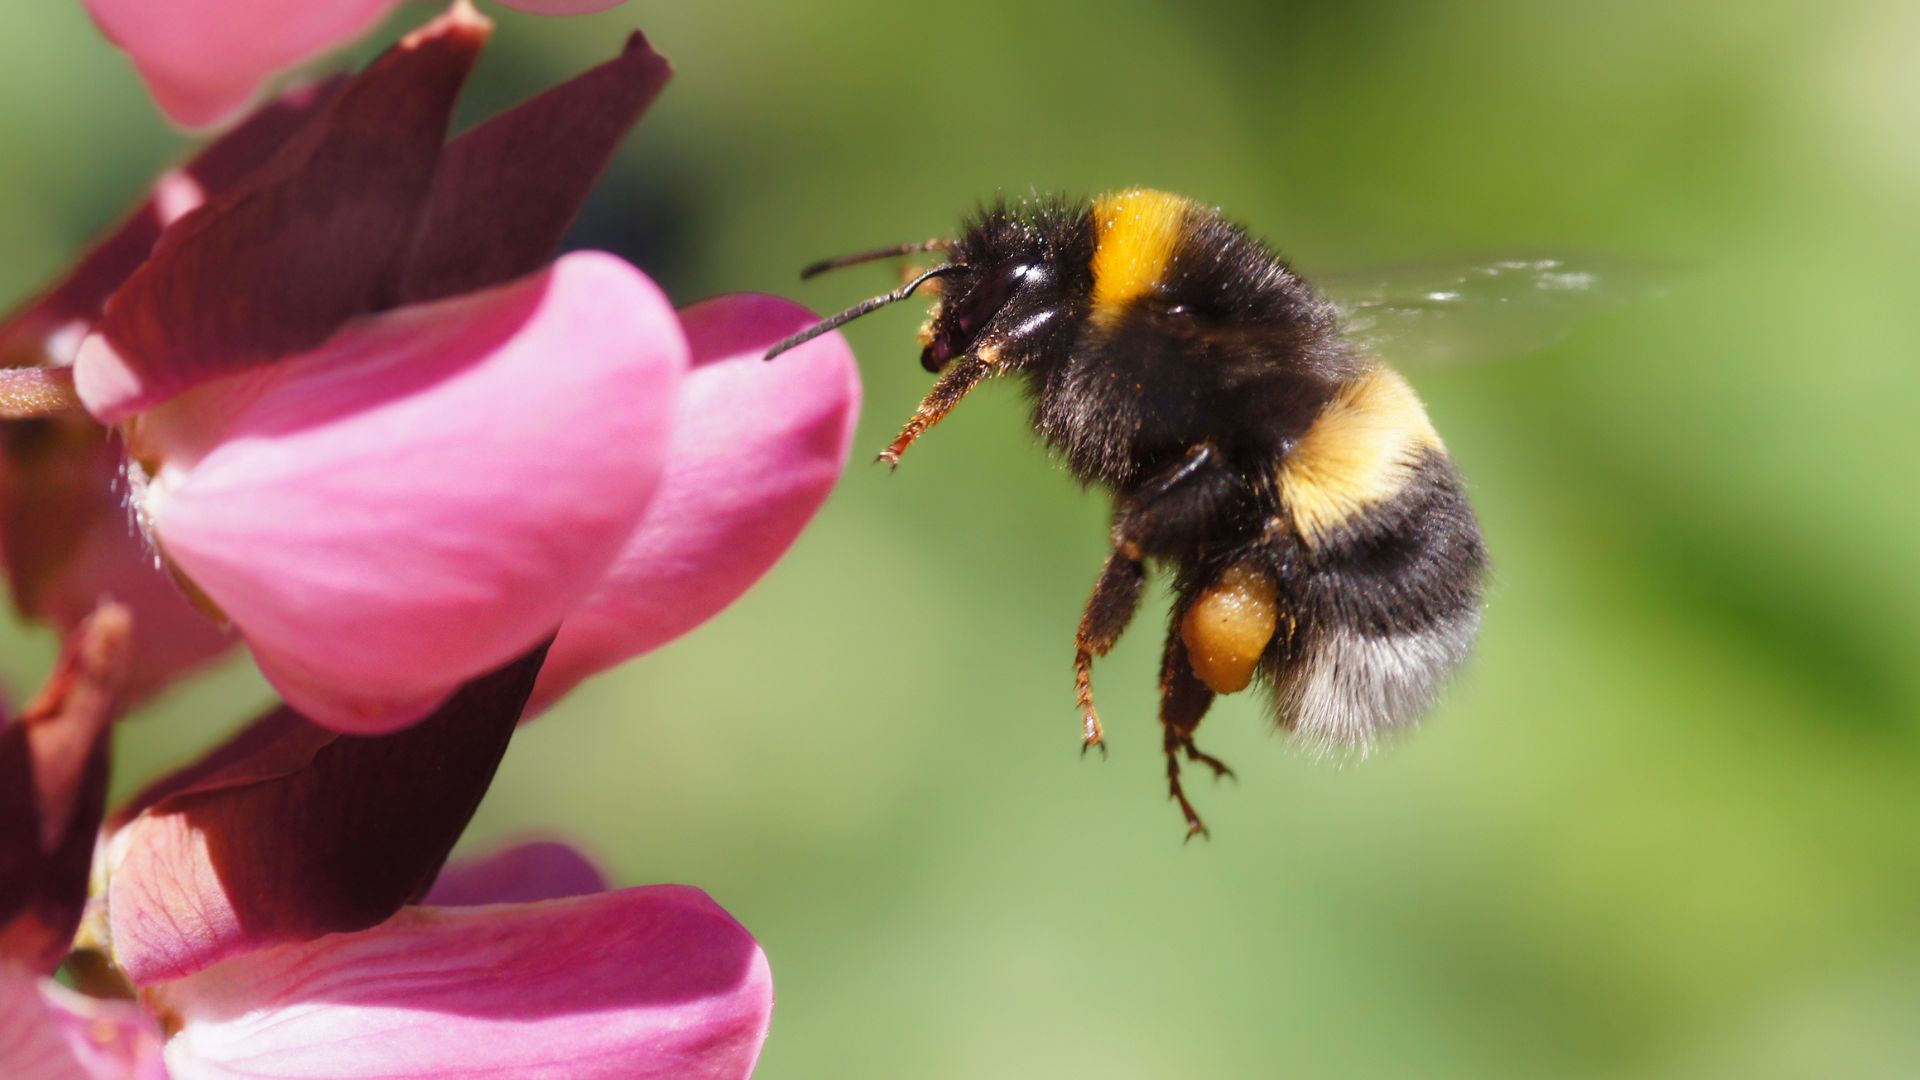 Farmers friend in danger; climate change is killing baby bumblebees [Video]